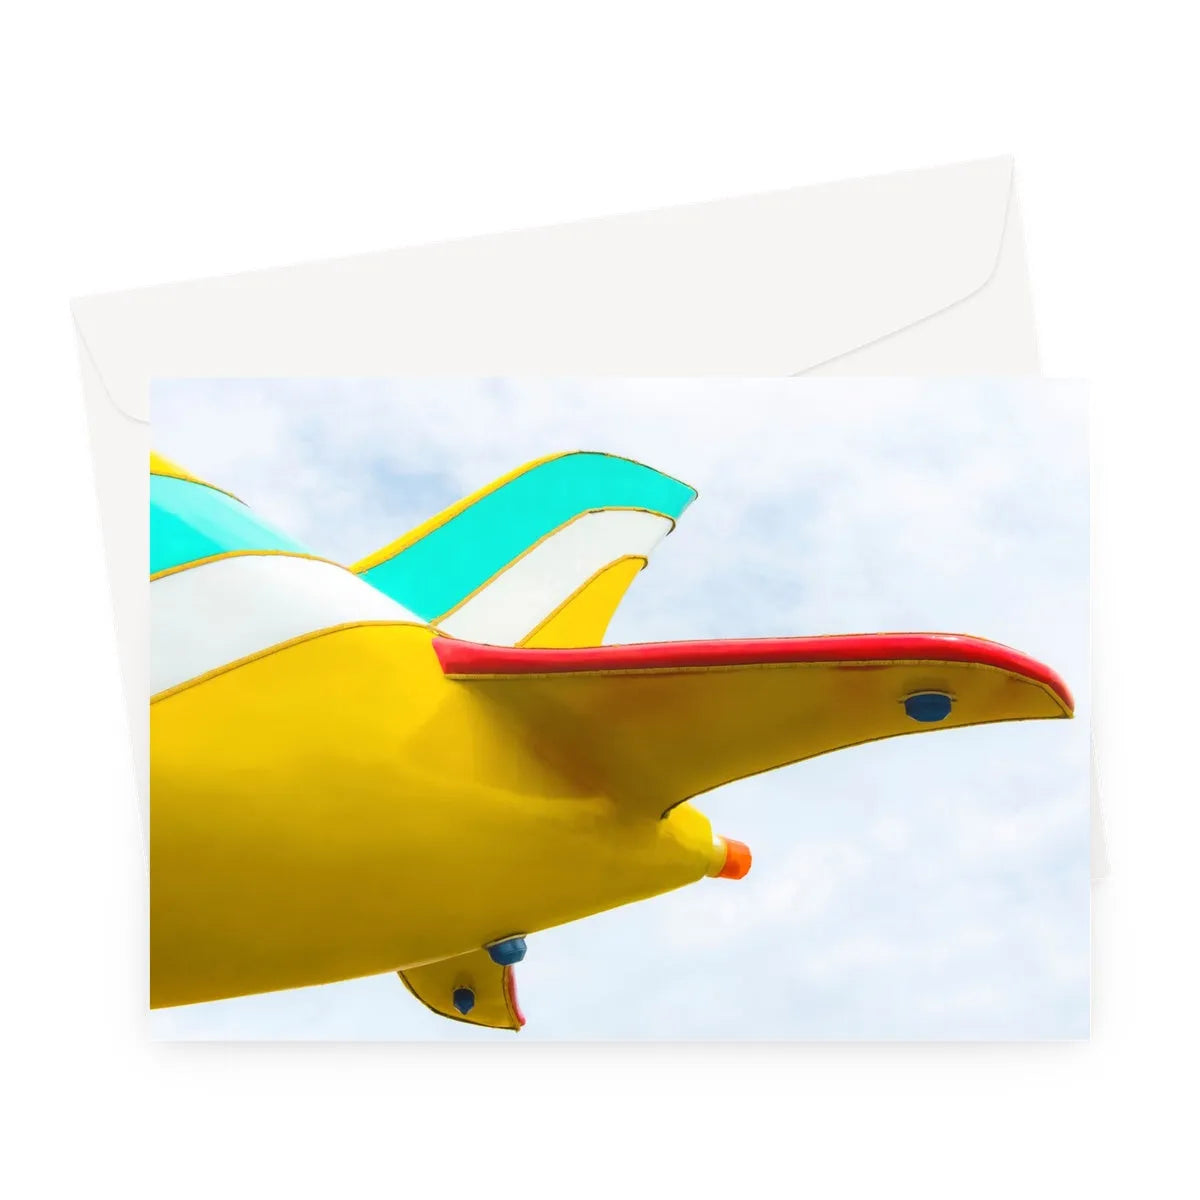 Flying High 2 Greeting Card - A5 Landscape / 10 Cards - Greeting & Note Cards - Aesthetic Art